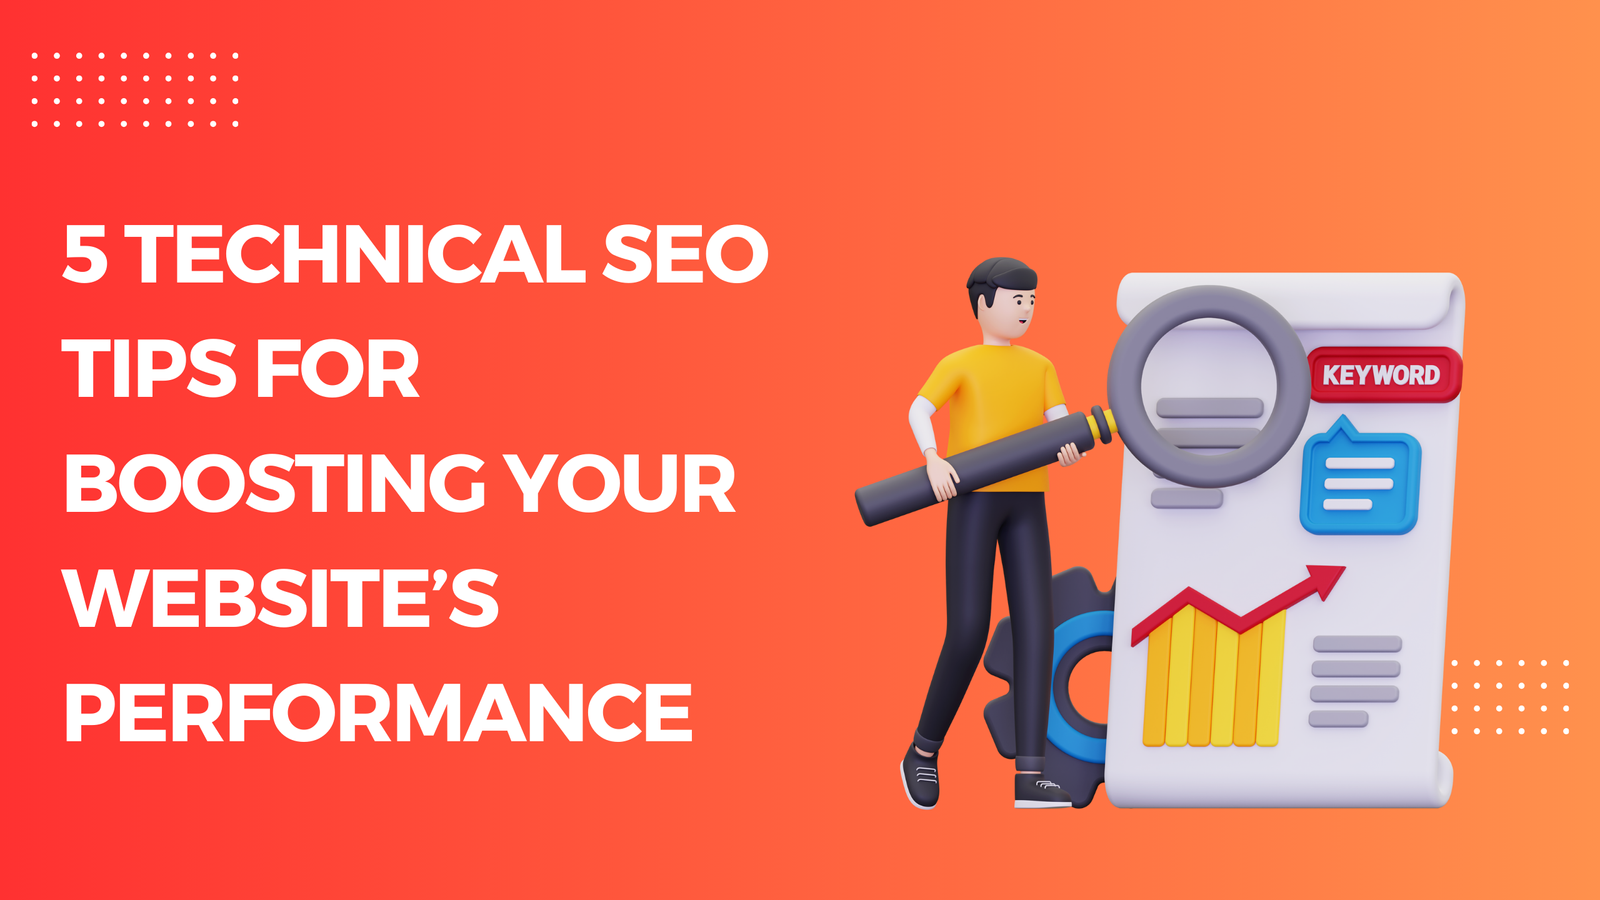 5 Technical SEO Tips for Boosting Your Website's Performance